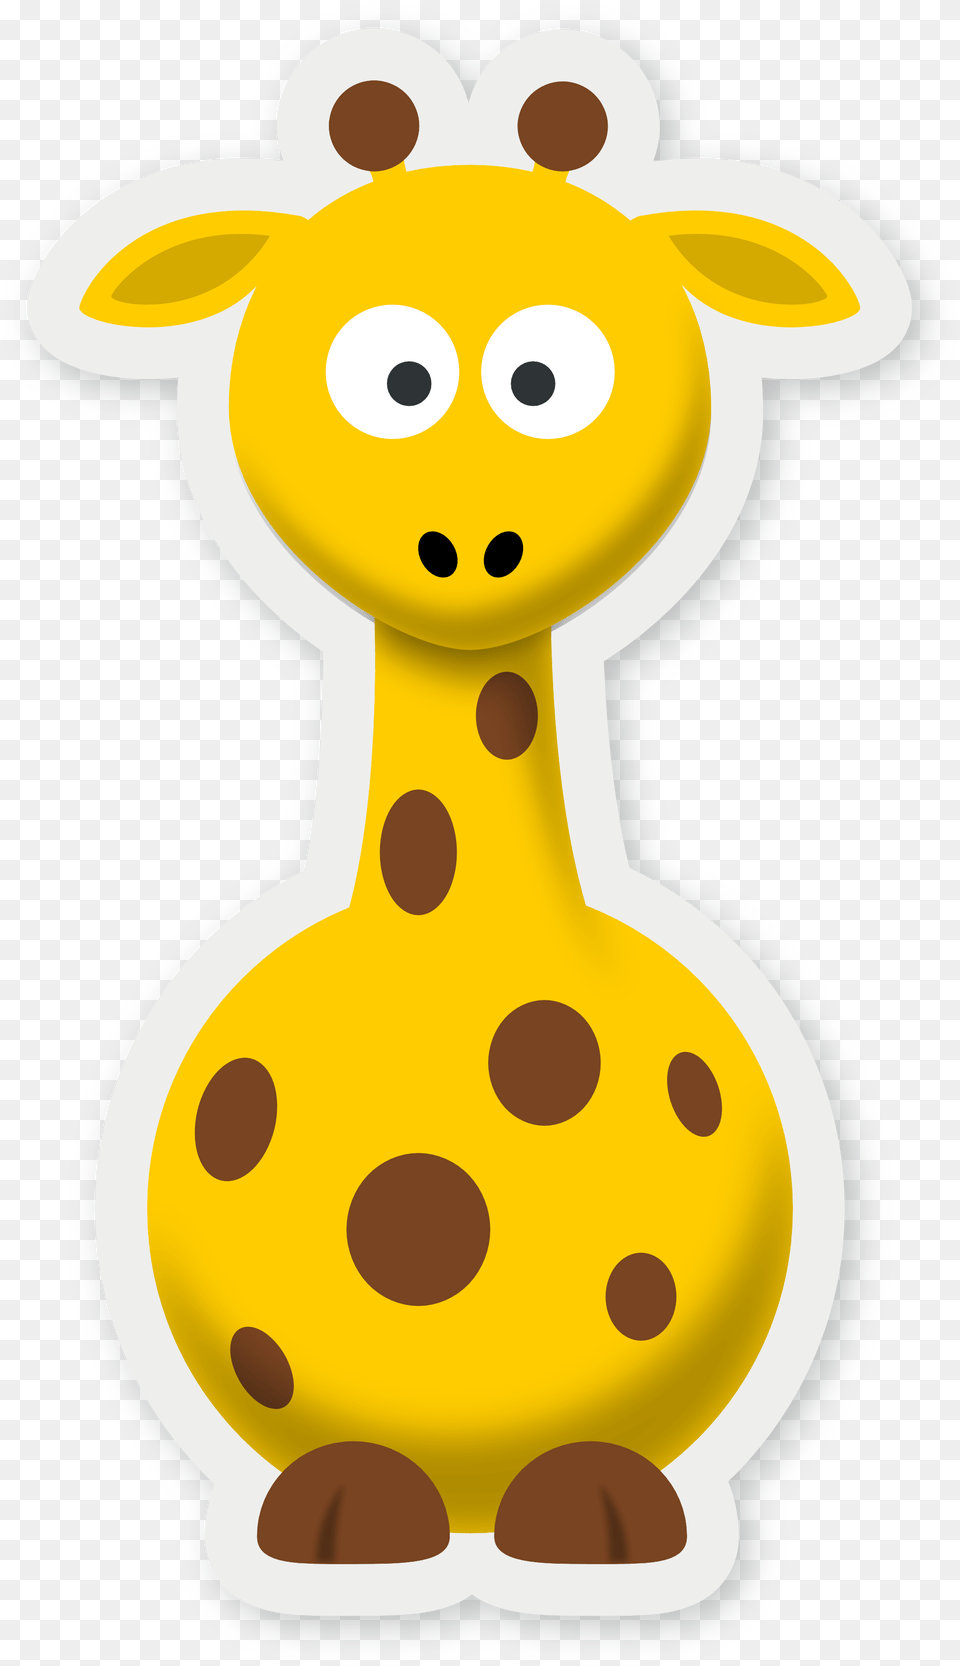 Download Pics Of Cartoon Giraffes Cartoon Pictures Of Giraffes, Food, Sweets, Plush, Toy Free Png